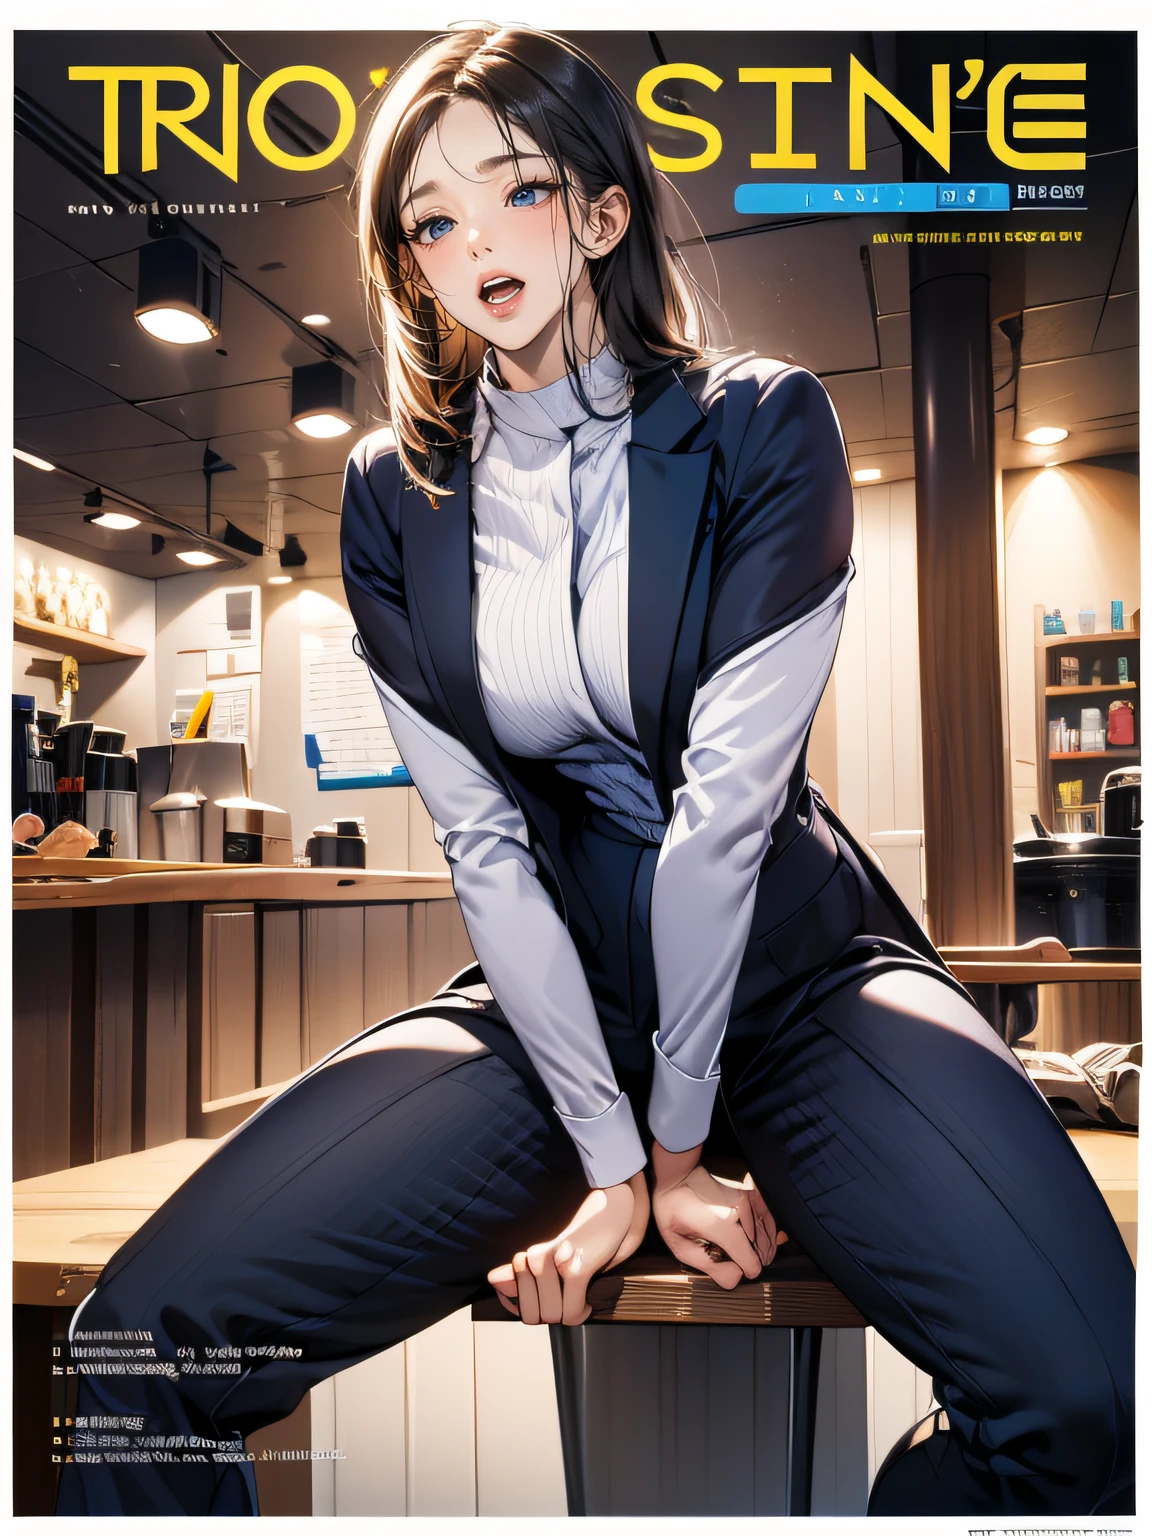 (((magazine's cover))), (large title), (many heading), (white border), suit, name plate, ID card, (whole body), straddling to hit her crotch on counter edge, open legs, raise leg, open mouth, masturbation, ecstasy face, outside, customers, ceiling,